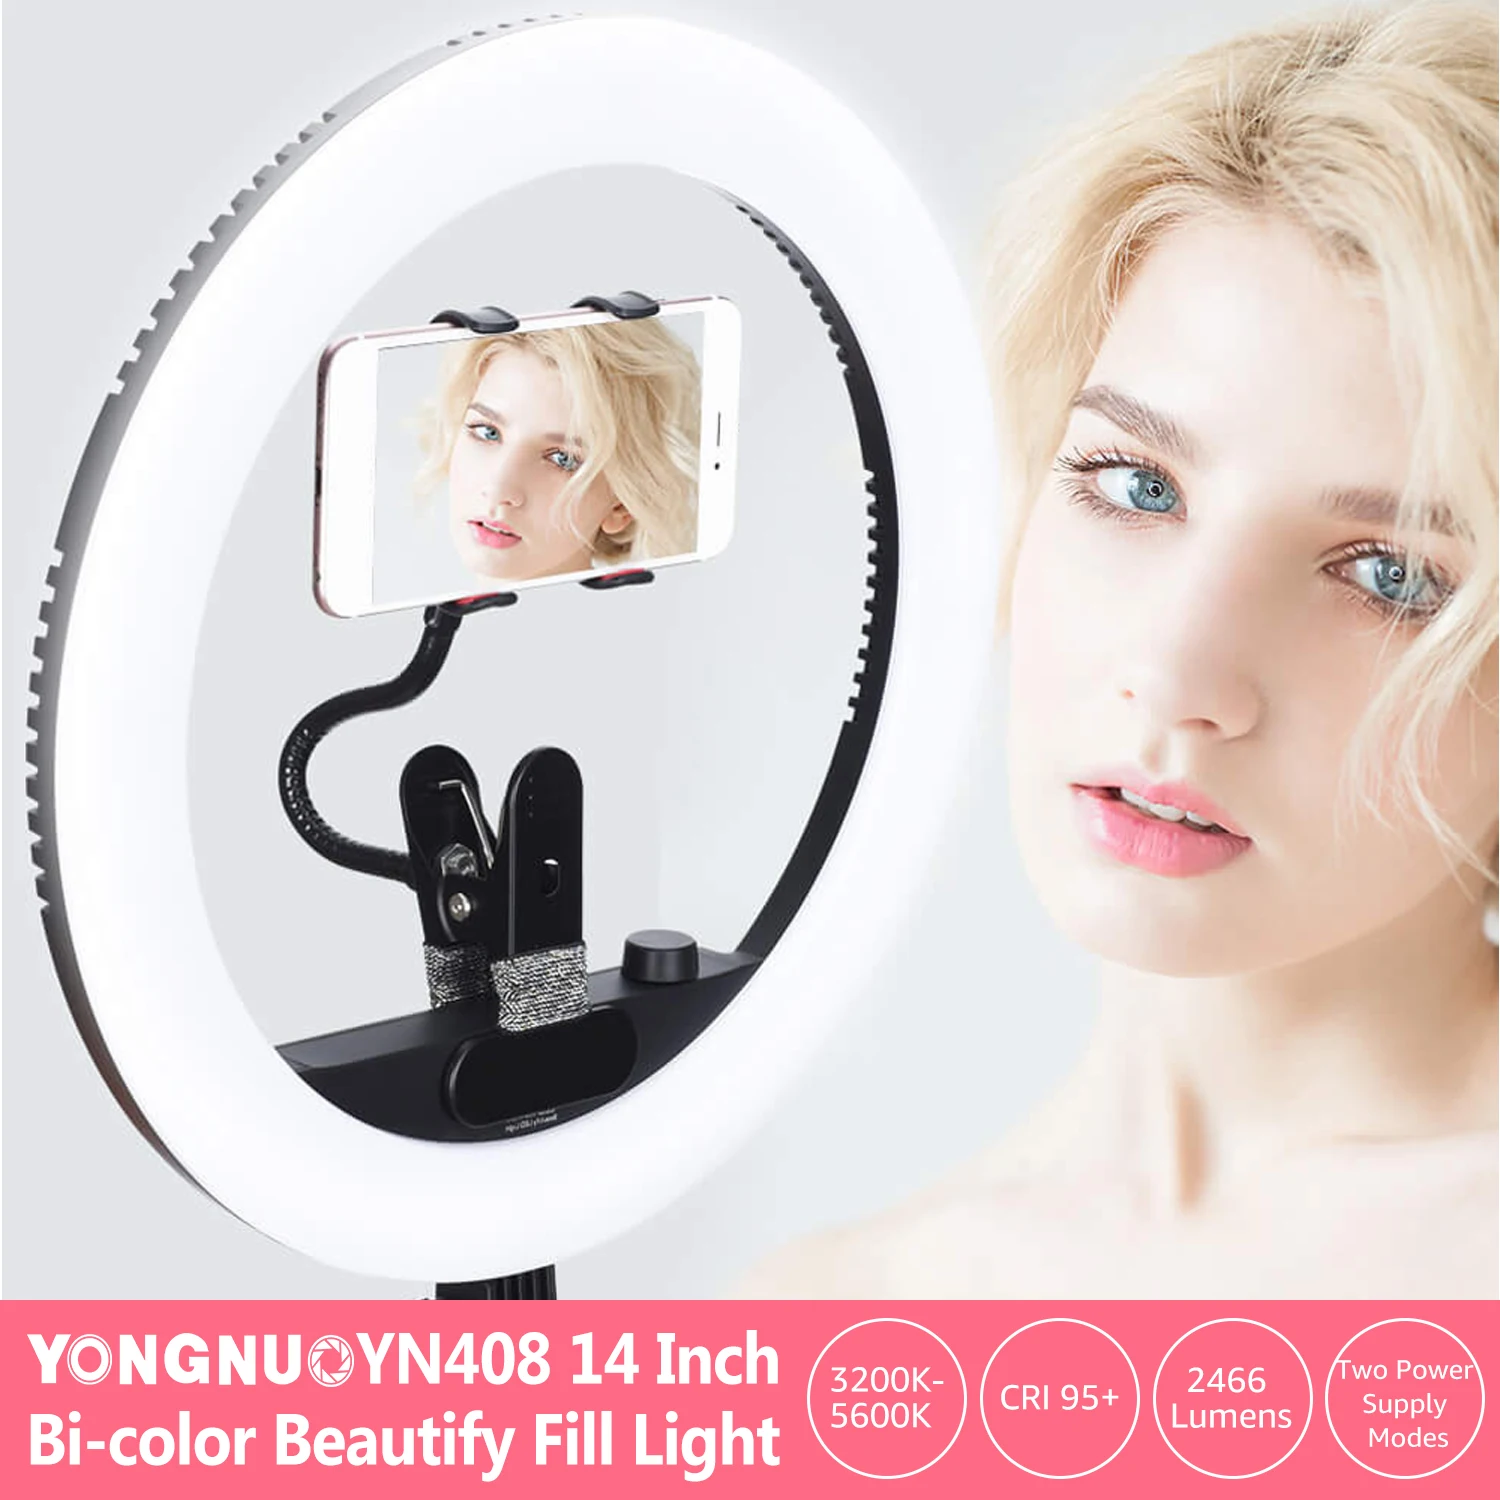 

YONGNUO YN408 14 Inch LED selfie Ring Video Fill Light 3200K-5600K Bi-color Dimmable Photography Lamp 24W CRI 95 for Photography